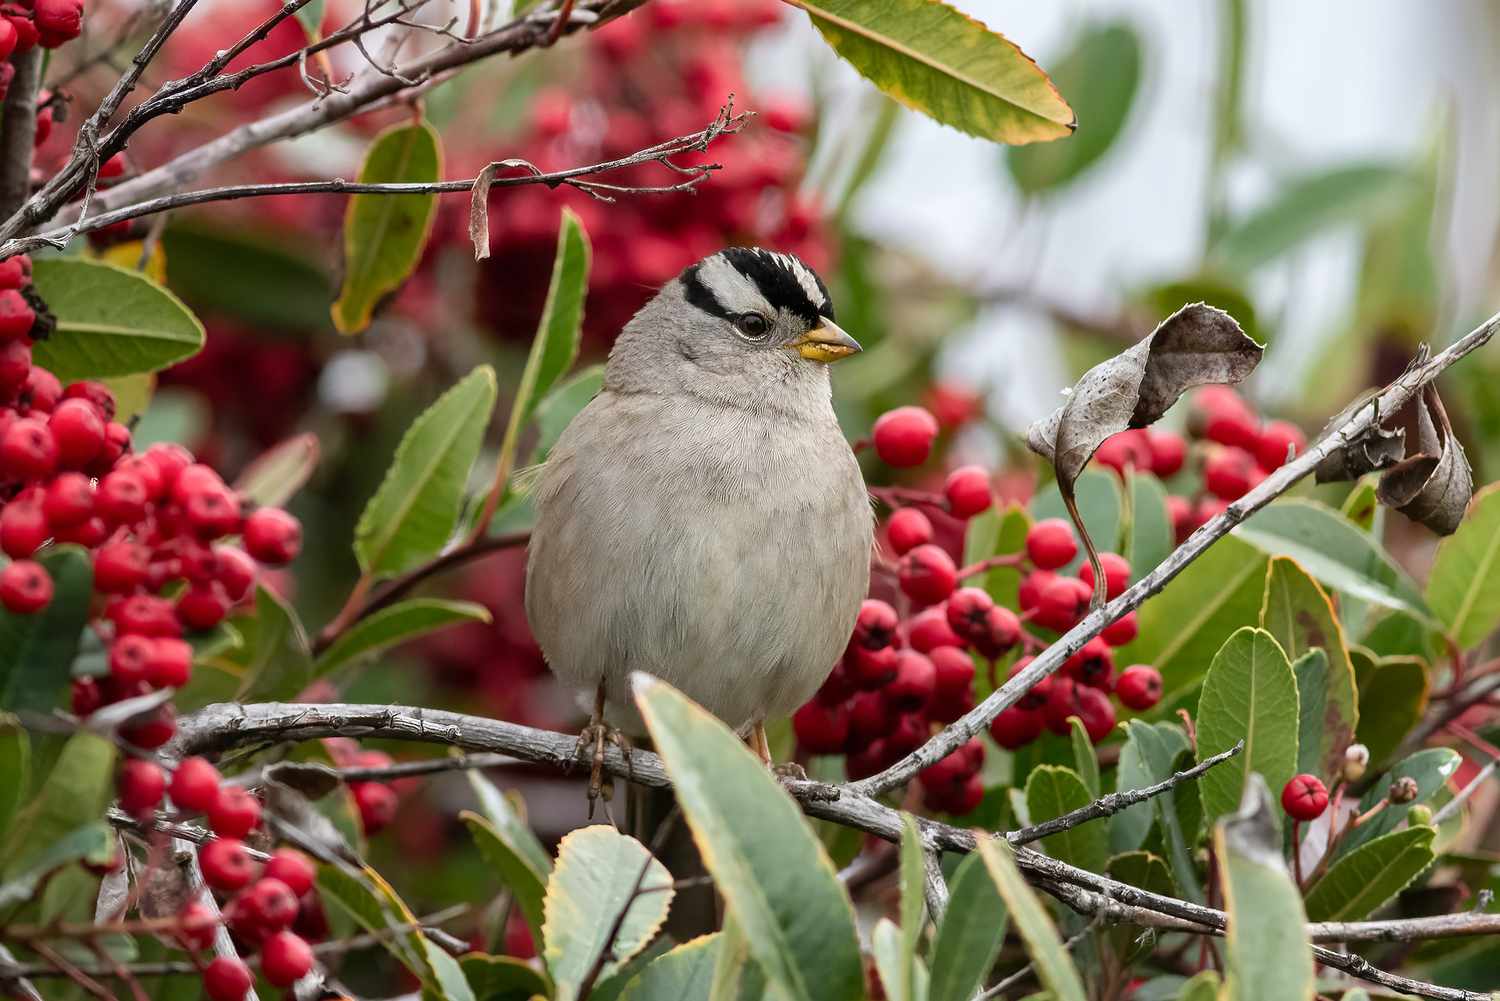 White-crowned sparrow sitting in shrub surrounded by red berries